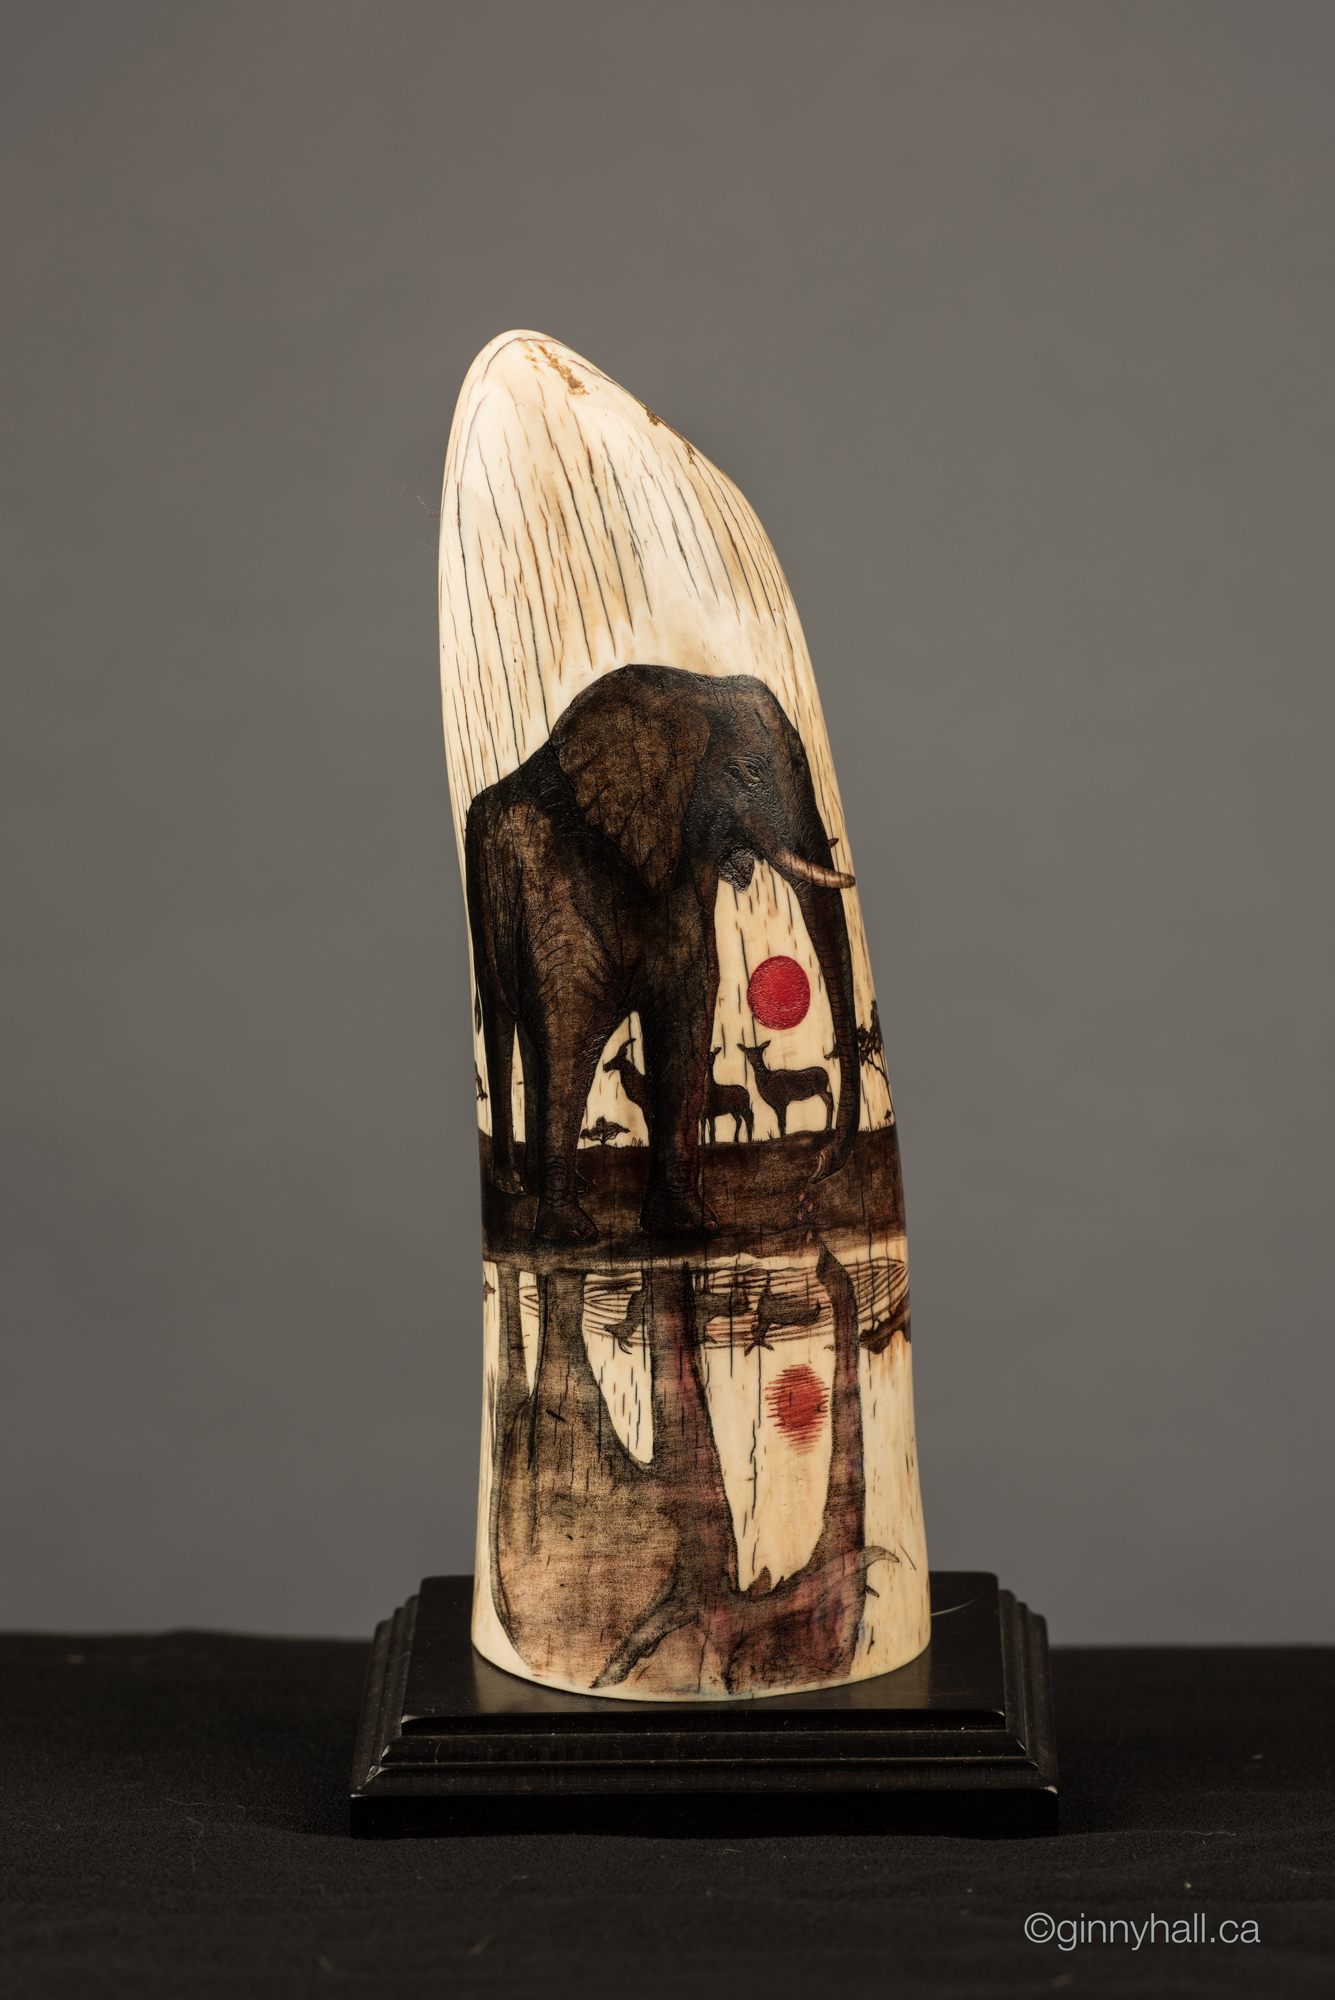 A scrimshaw peice by Ginny Hall depicting an elephant.